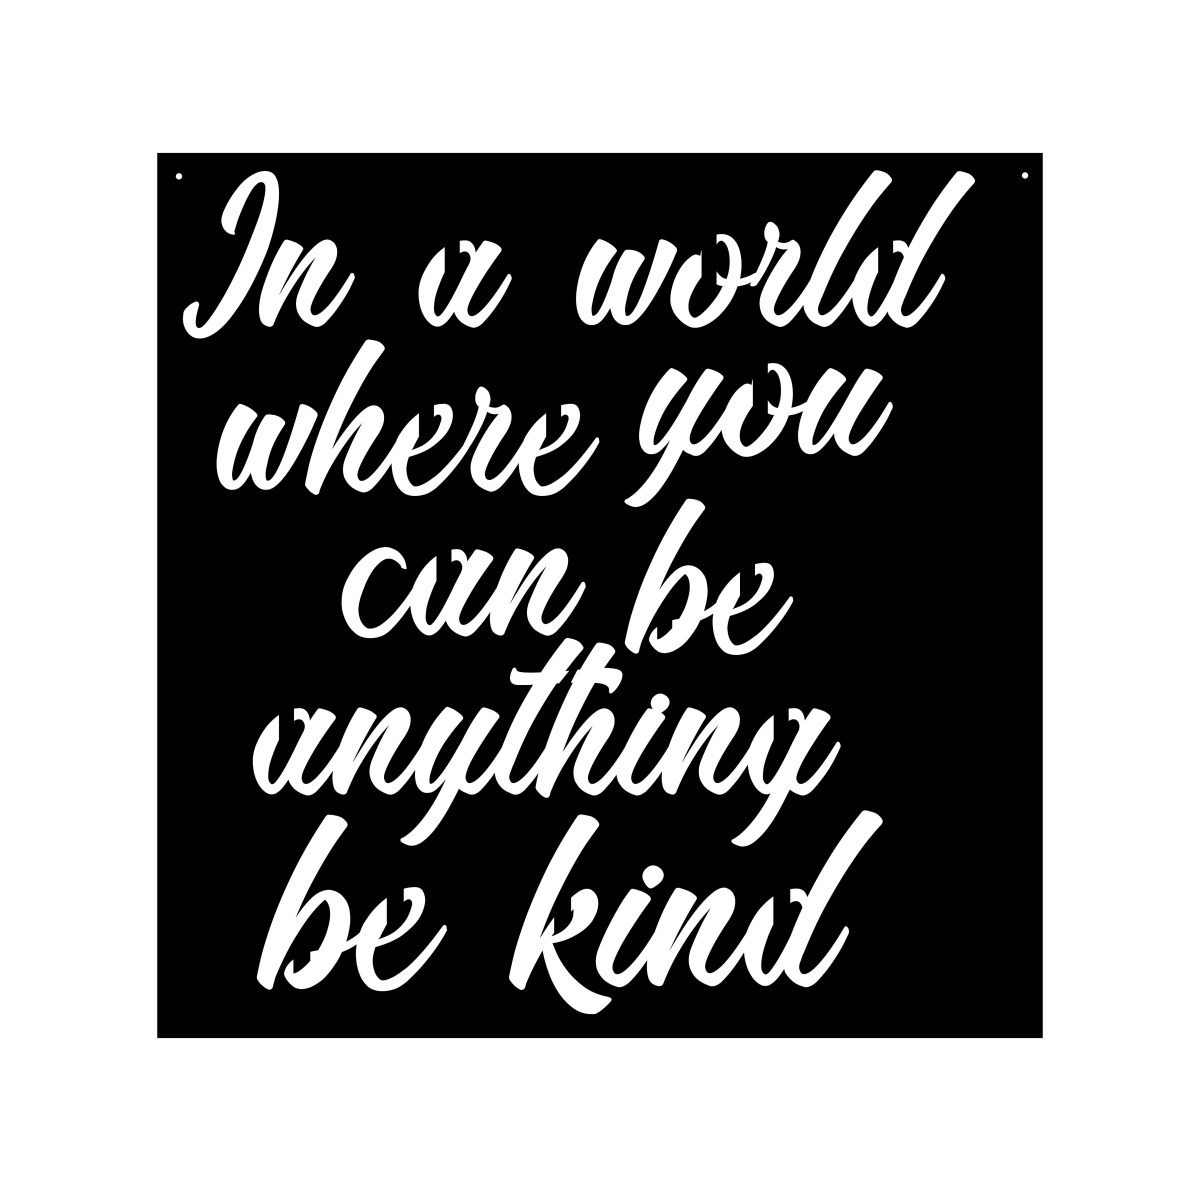 18 In. Faith Be Kind Square Steel Laser Cut Wall Art A Script Cut-out Of In A World Where You Can Be Anything, Be Kind In Shiny Steel